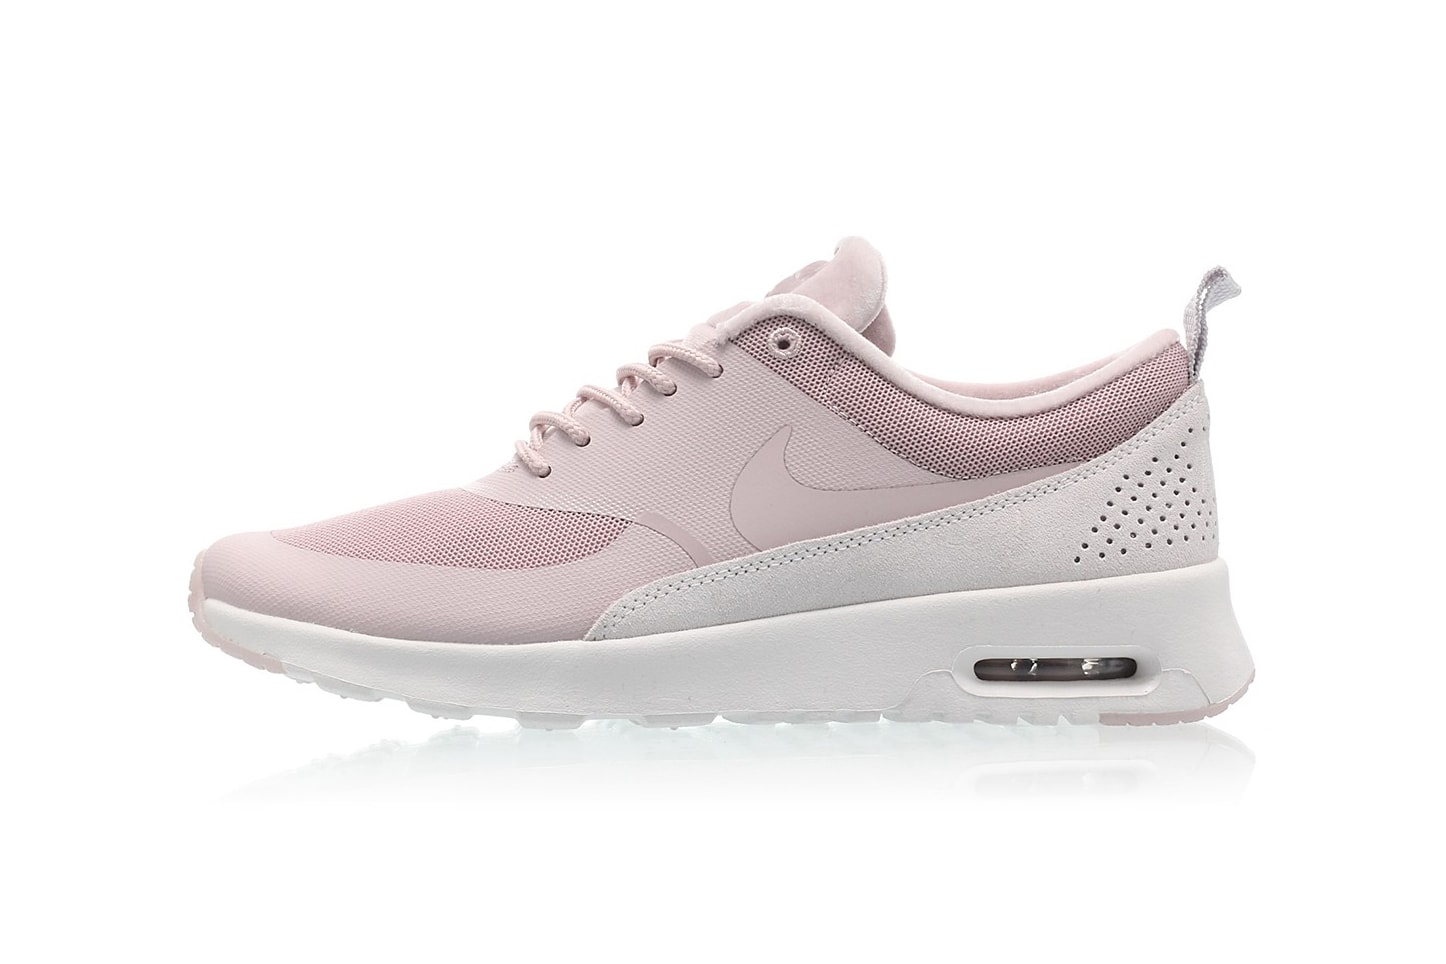 Nike Air Max Thea LX Particle Rose